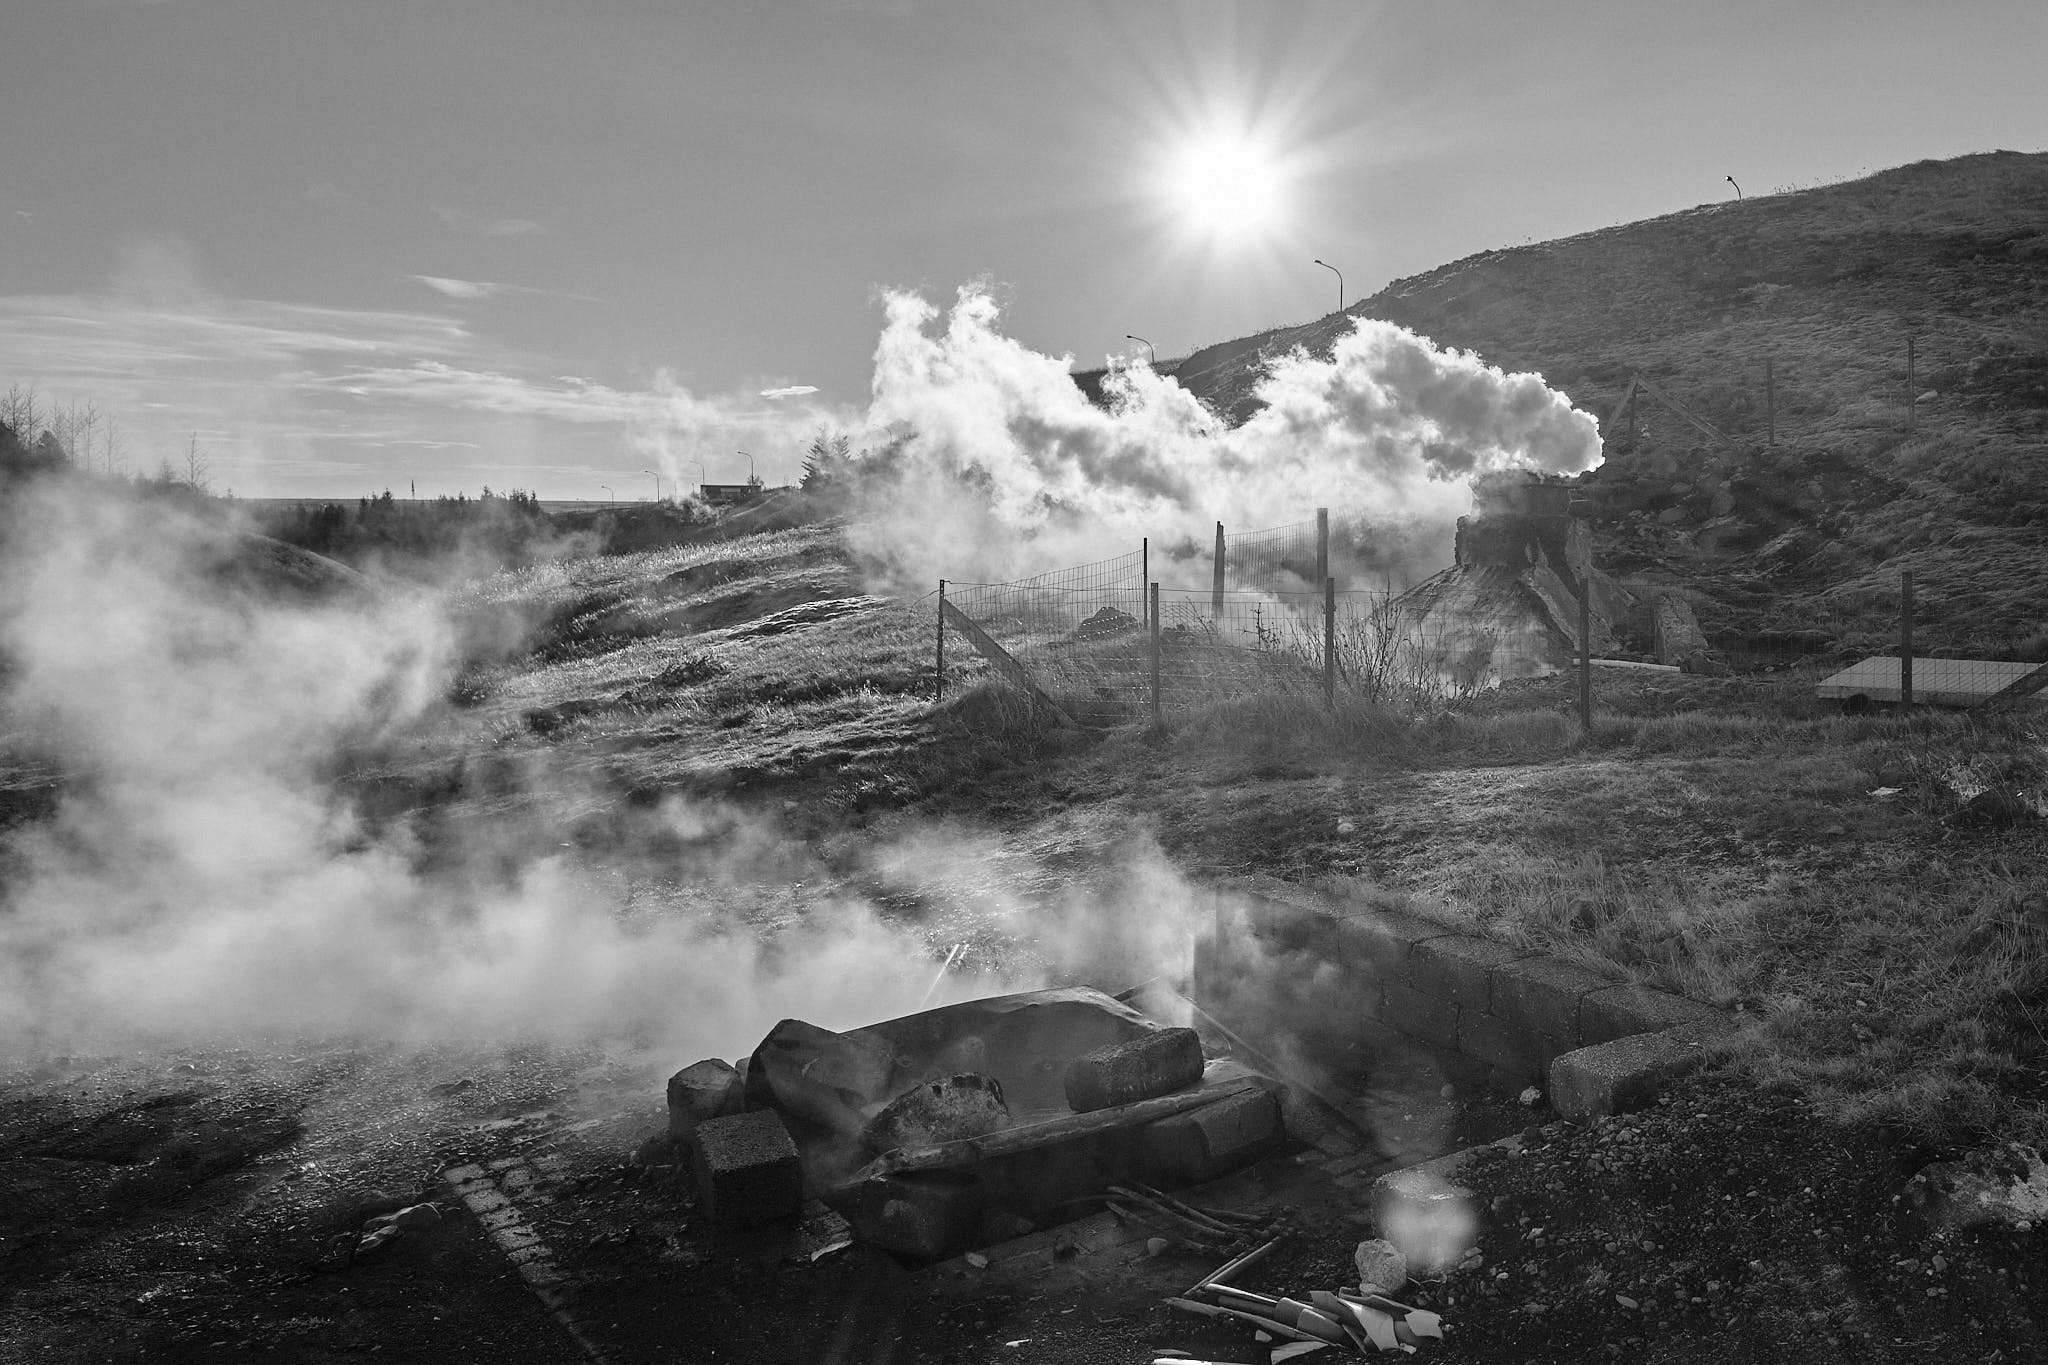 Steam rises from a geothermal well in Hveragerði